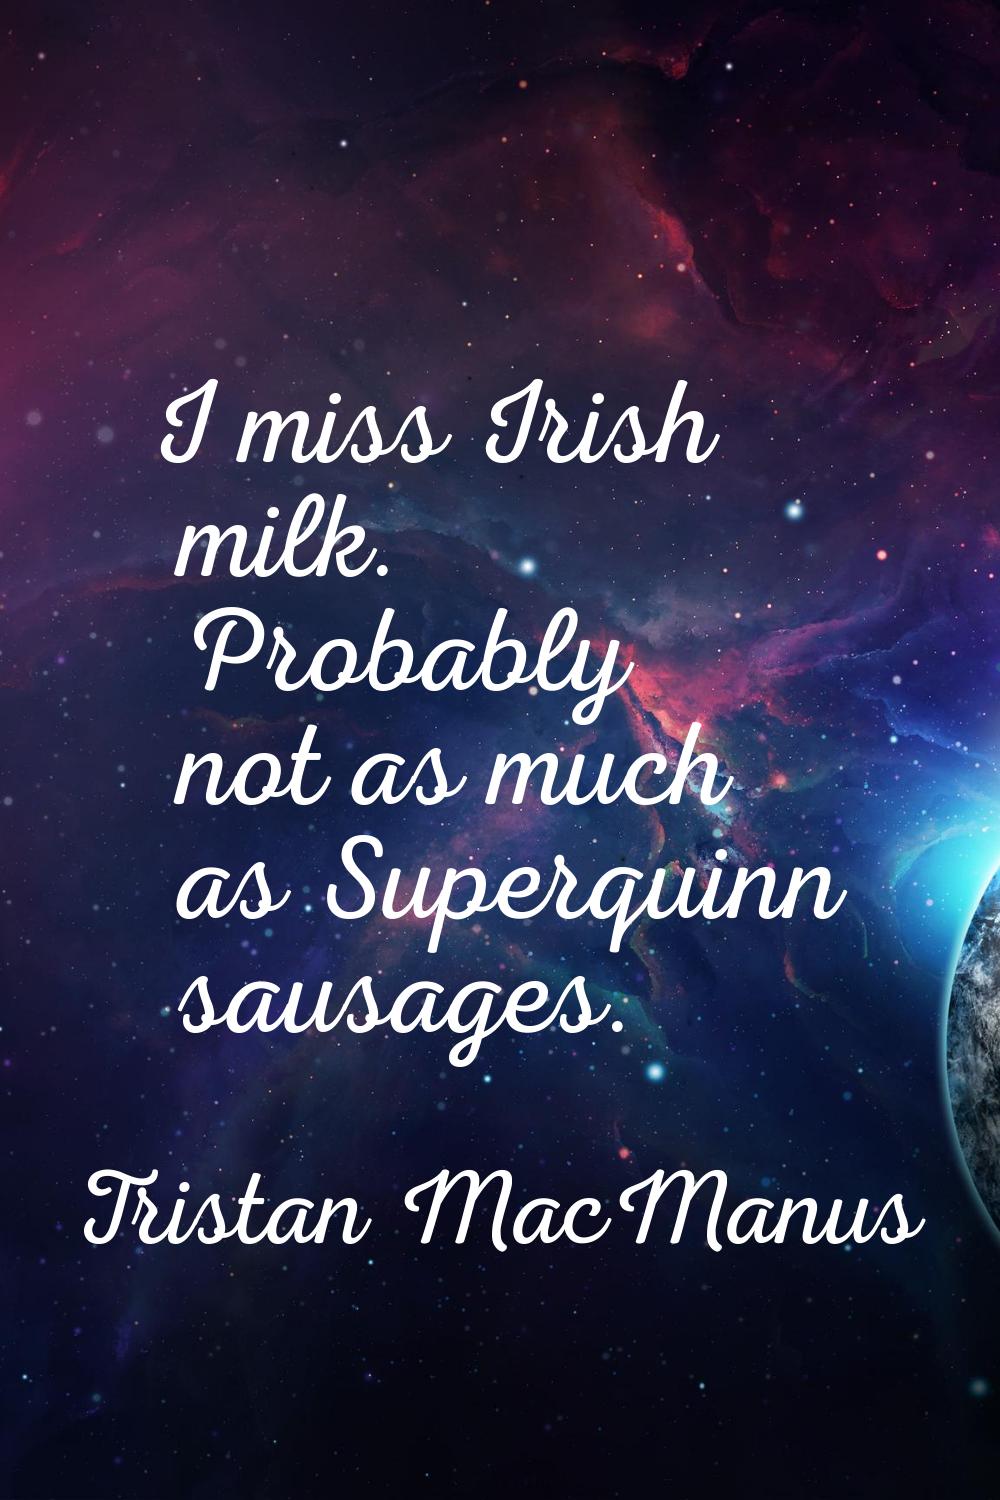 I miss Irish milk. Probably not as much as Superquinn sausages.